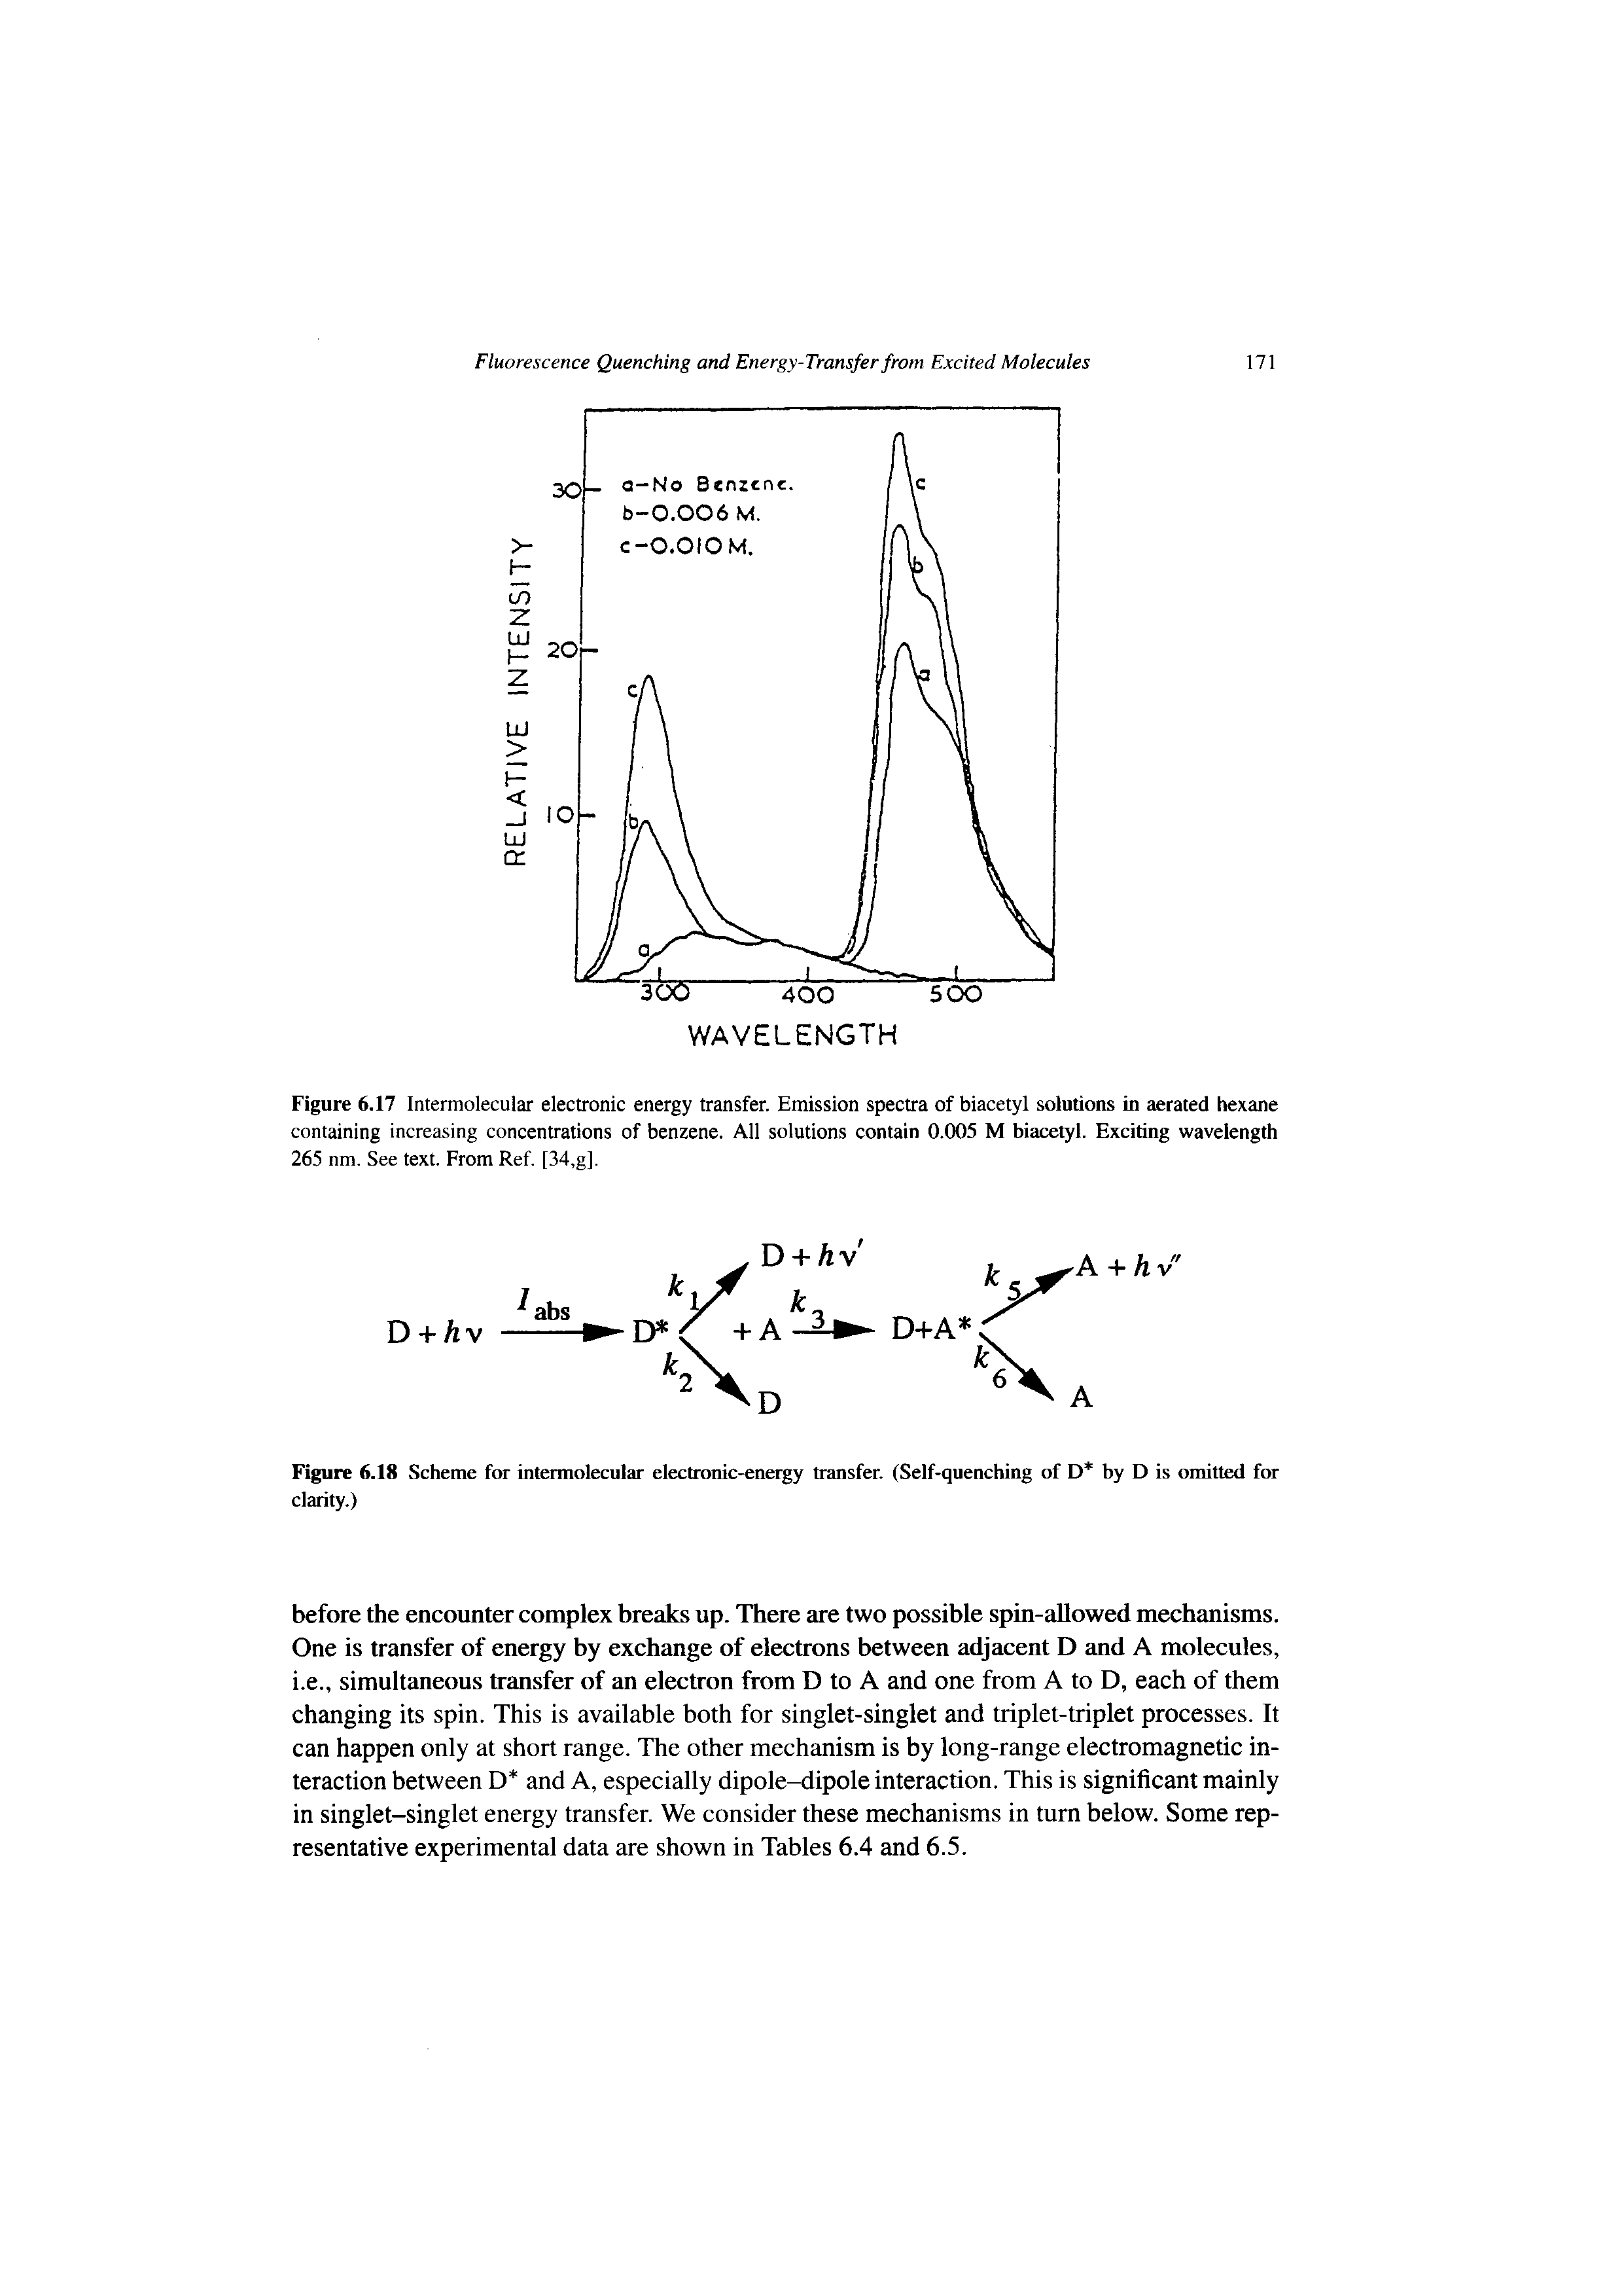 Figure 6.17 Intermolecular electronic energy transfer. Emission spectra of biacetyl solutions in aerated hexane containing increasing concentrations of benzene. All solutions contain 0.005 M biacetyl. Exciting wavelength 265 nm. See text. From Ref. [34,g].